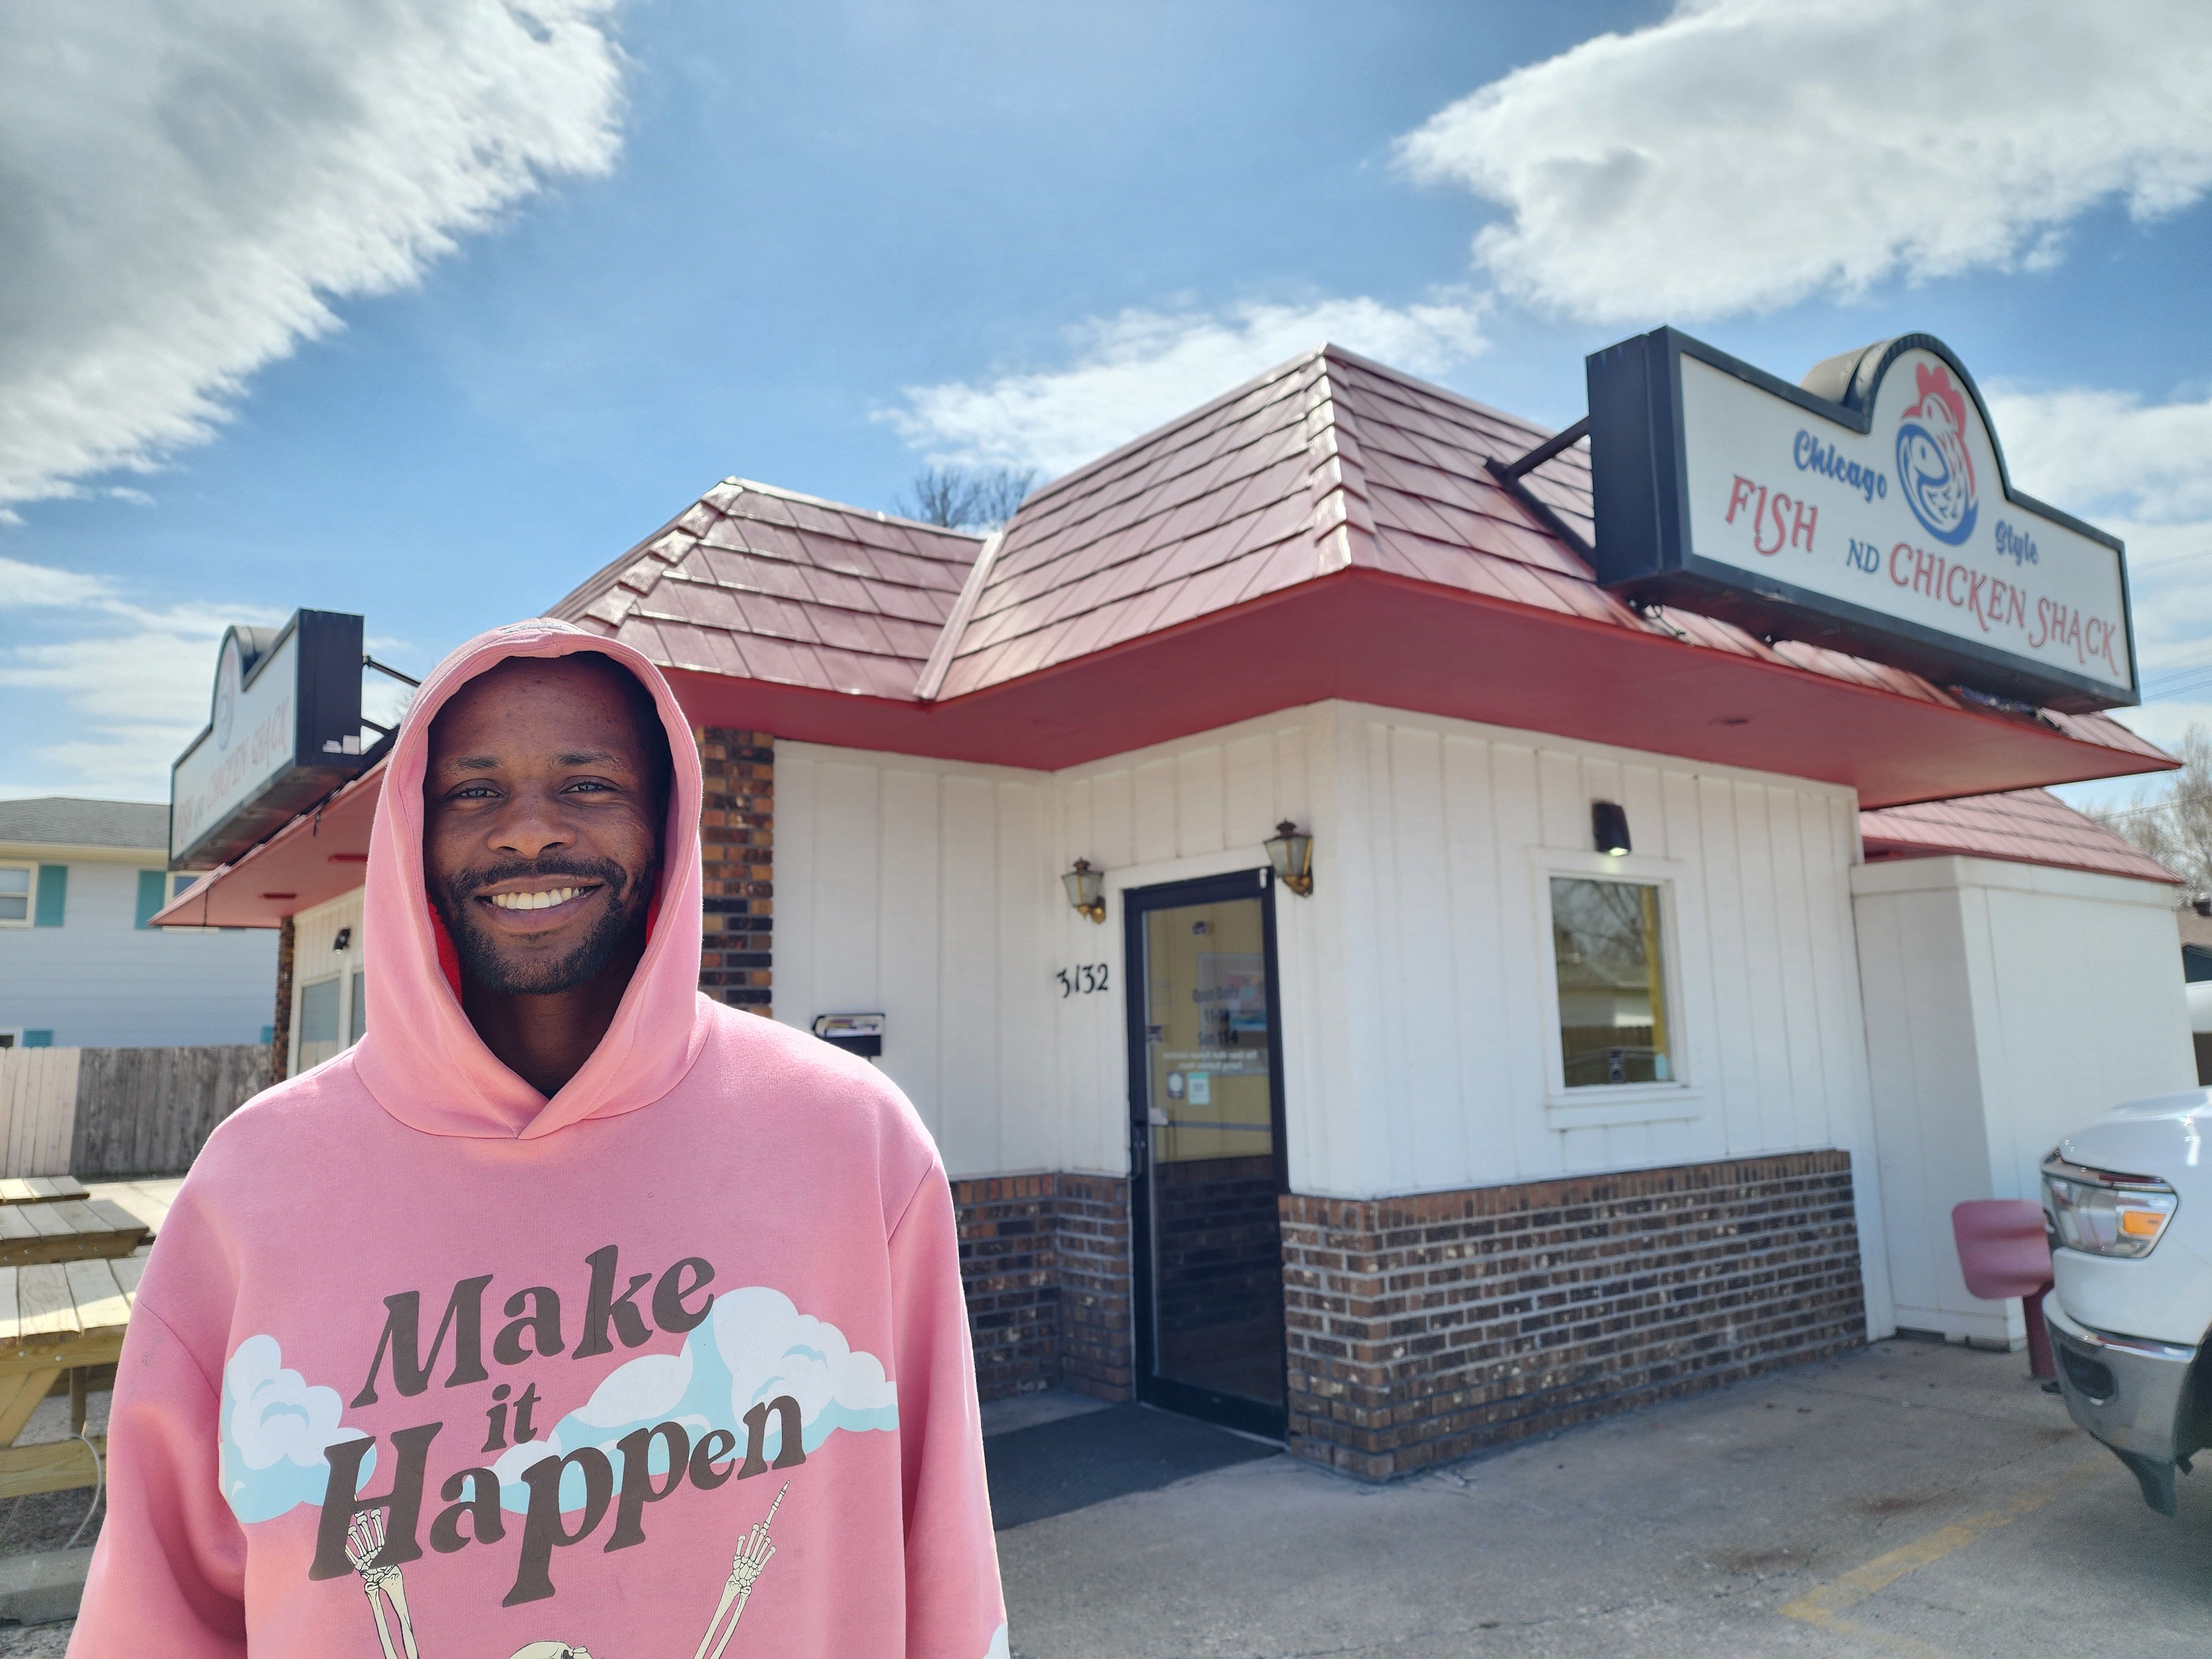 Caribbean restaurant moving into former Fish and Chicken Shack in north Fargo